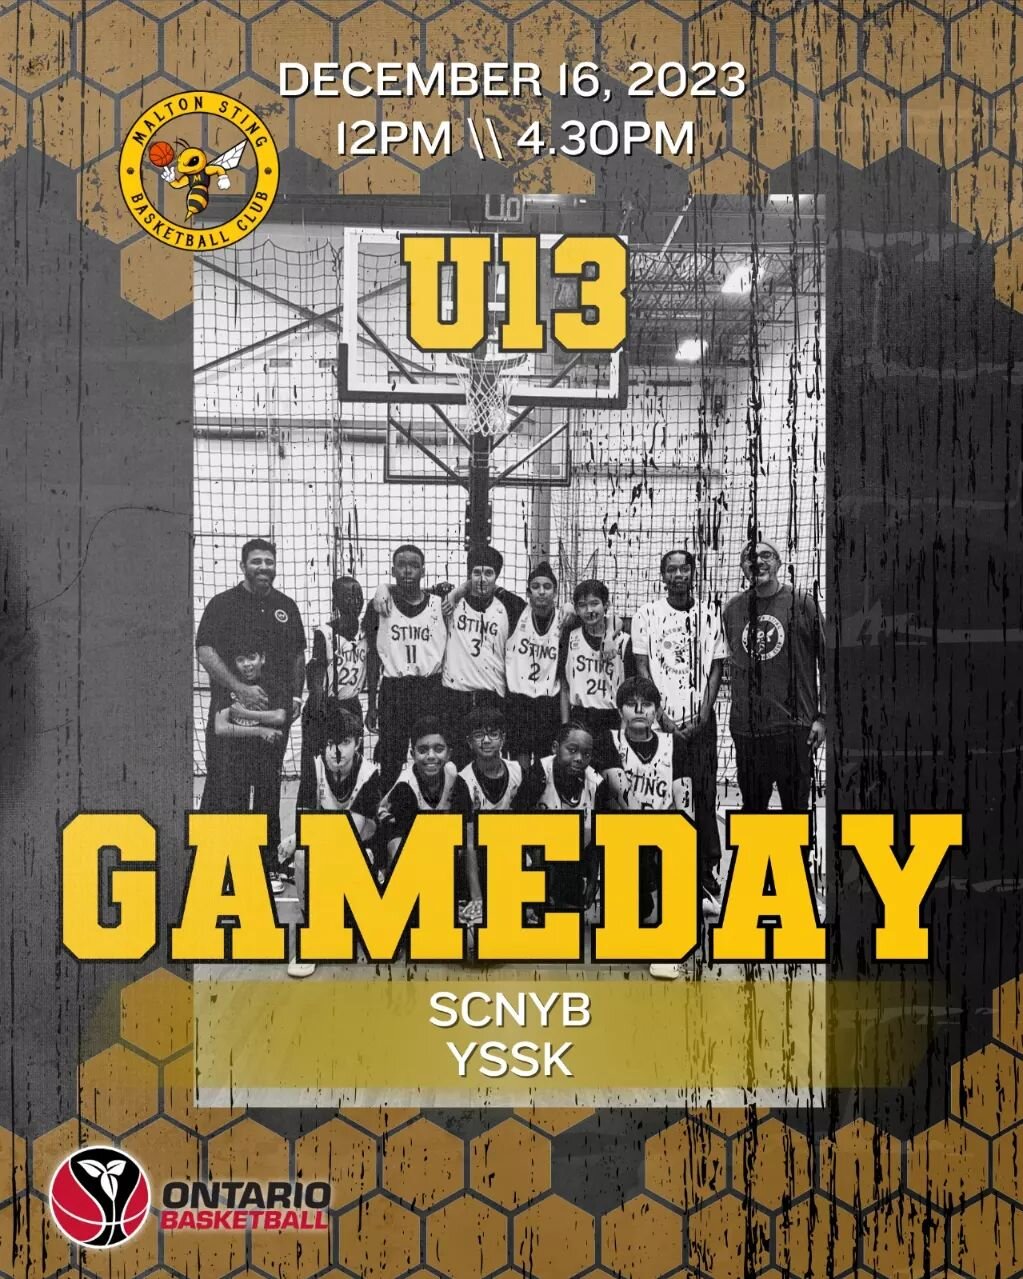 Gameday for our U13 boys 💪🔥